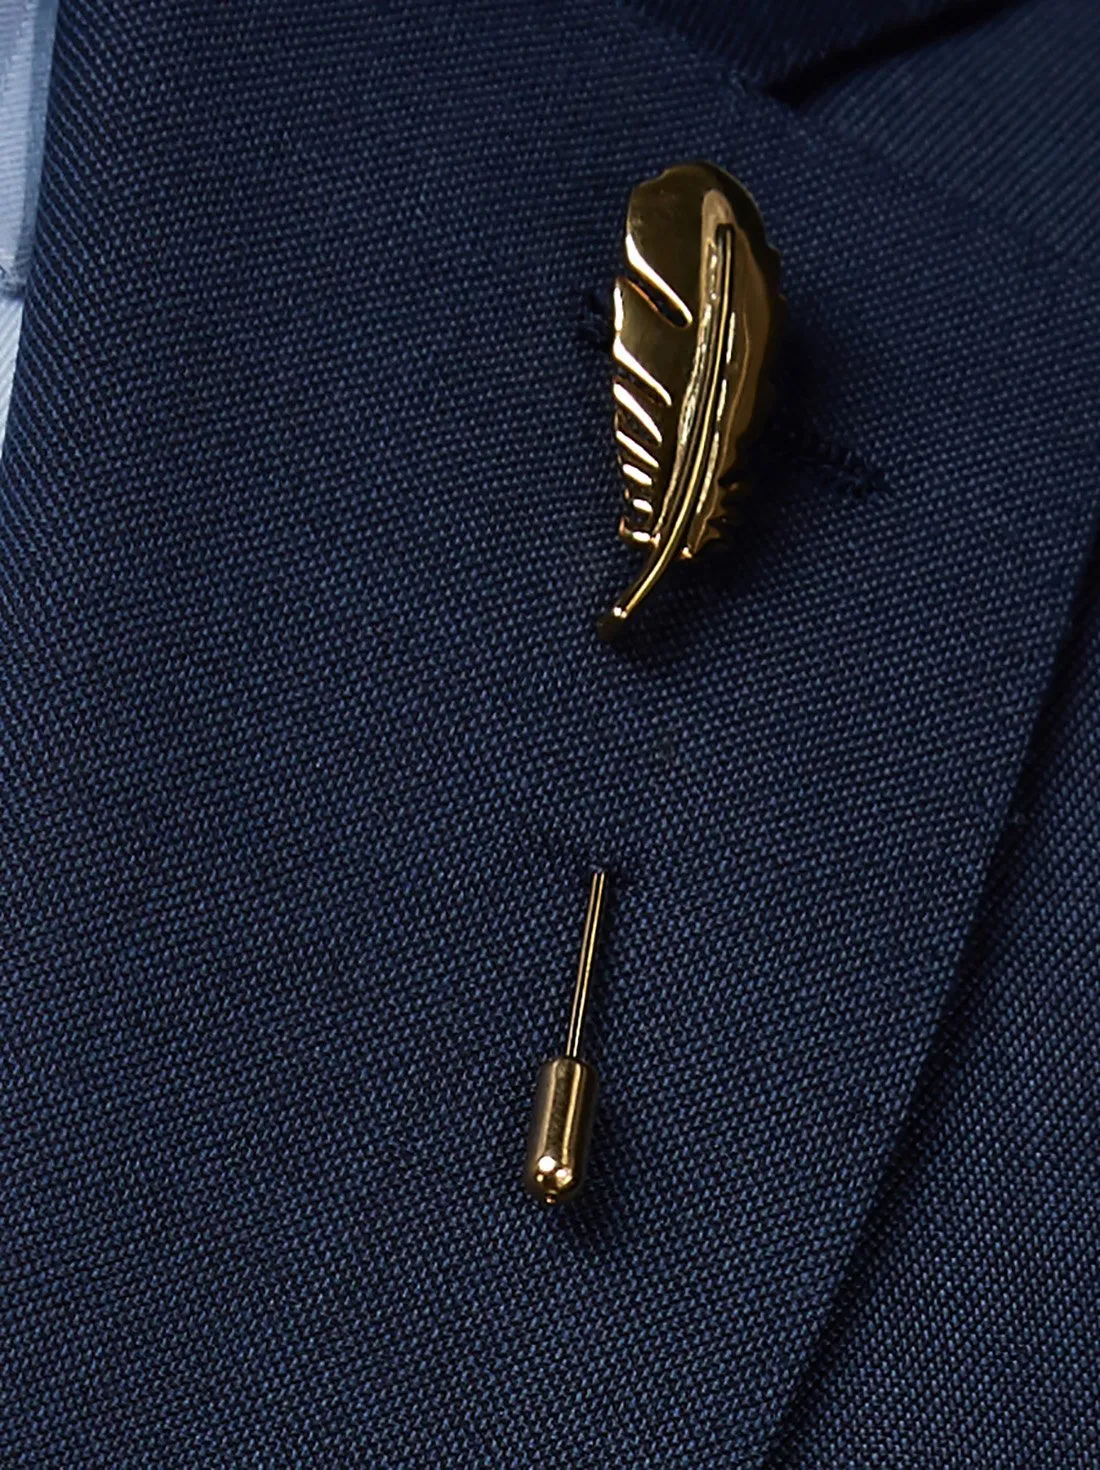 Gold Lapel Pin Feather